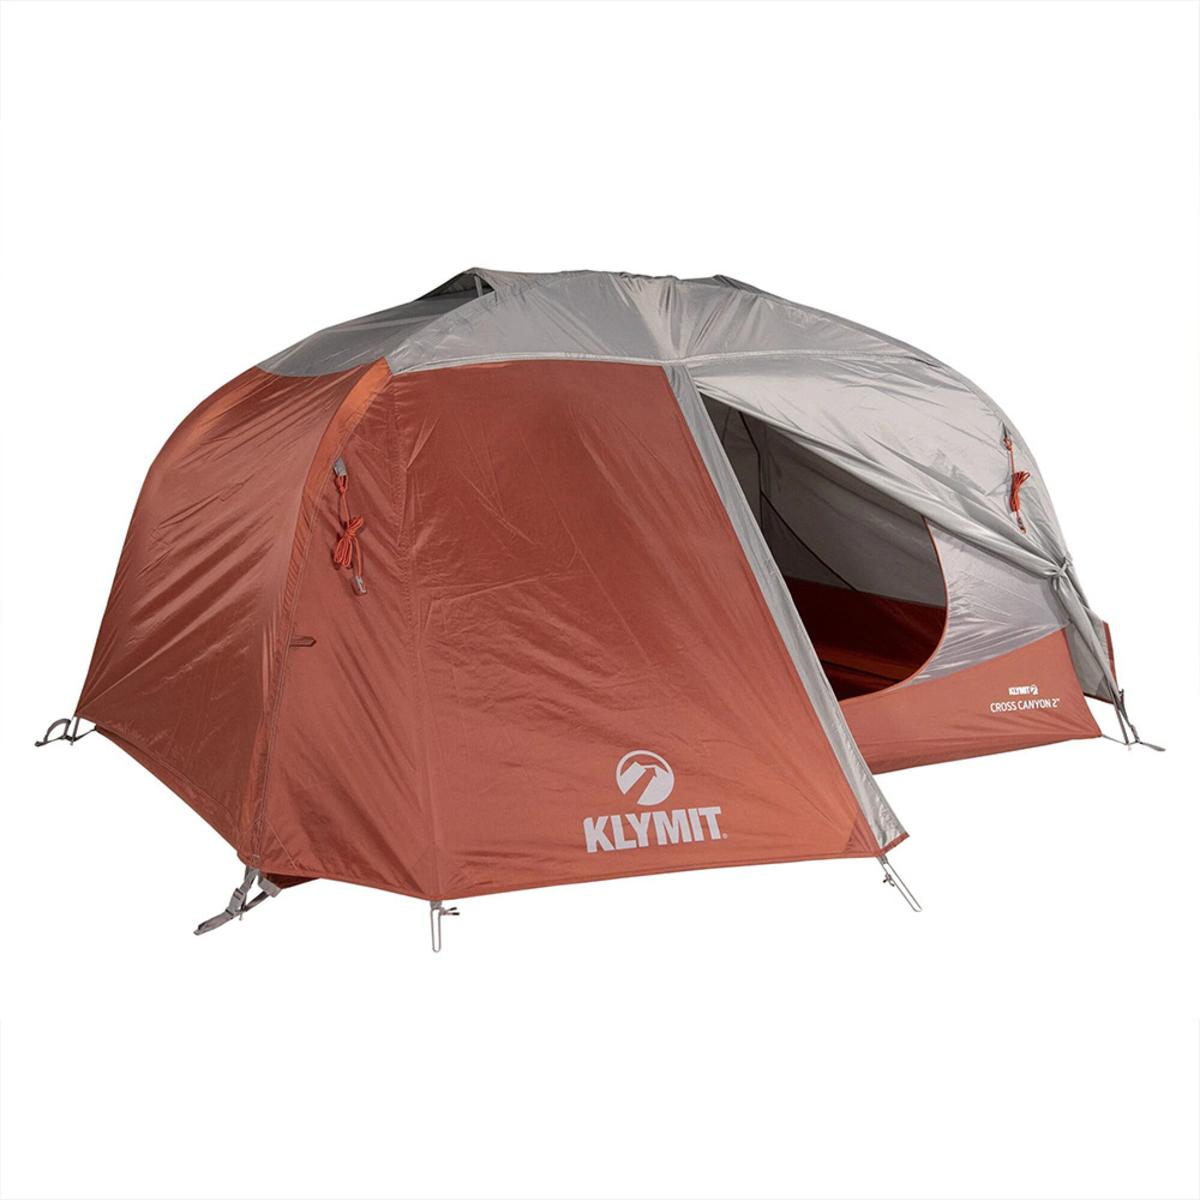 Klymit Cross Canyon 2 Person Tent - Red/Grey